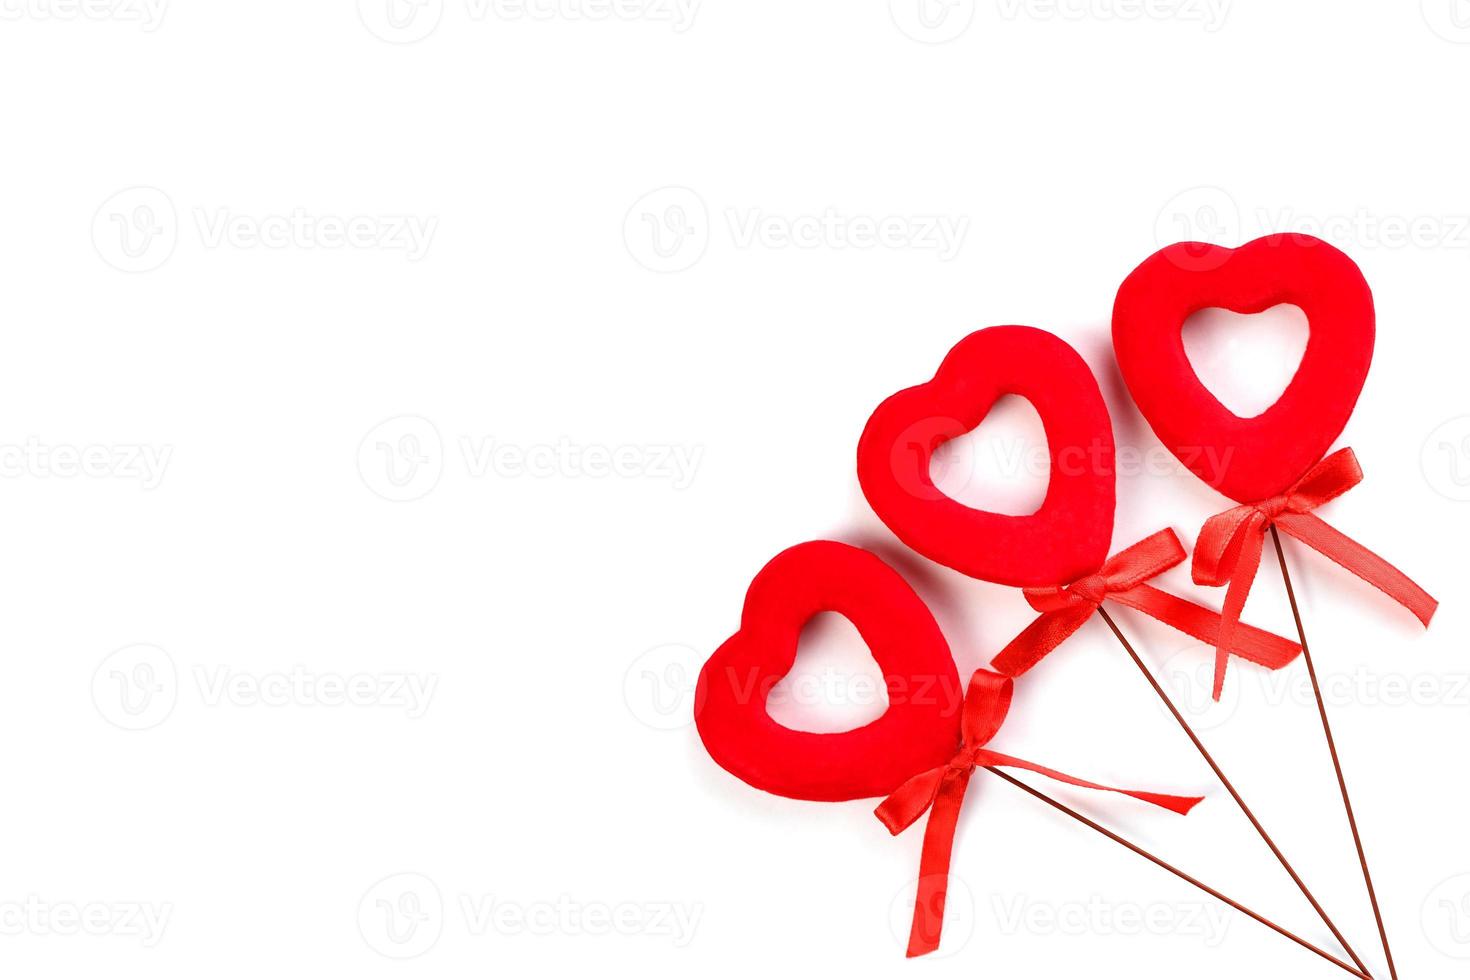 Three red hearts with bows on a white background. Isolate photo